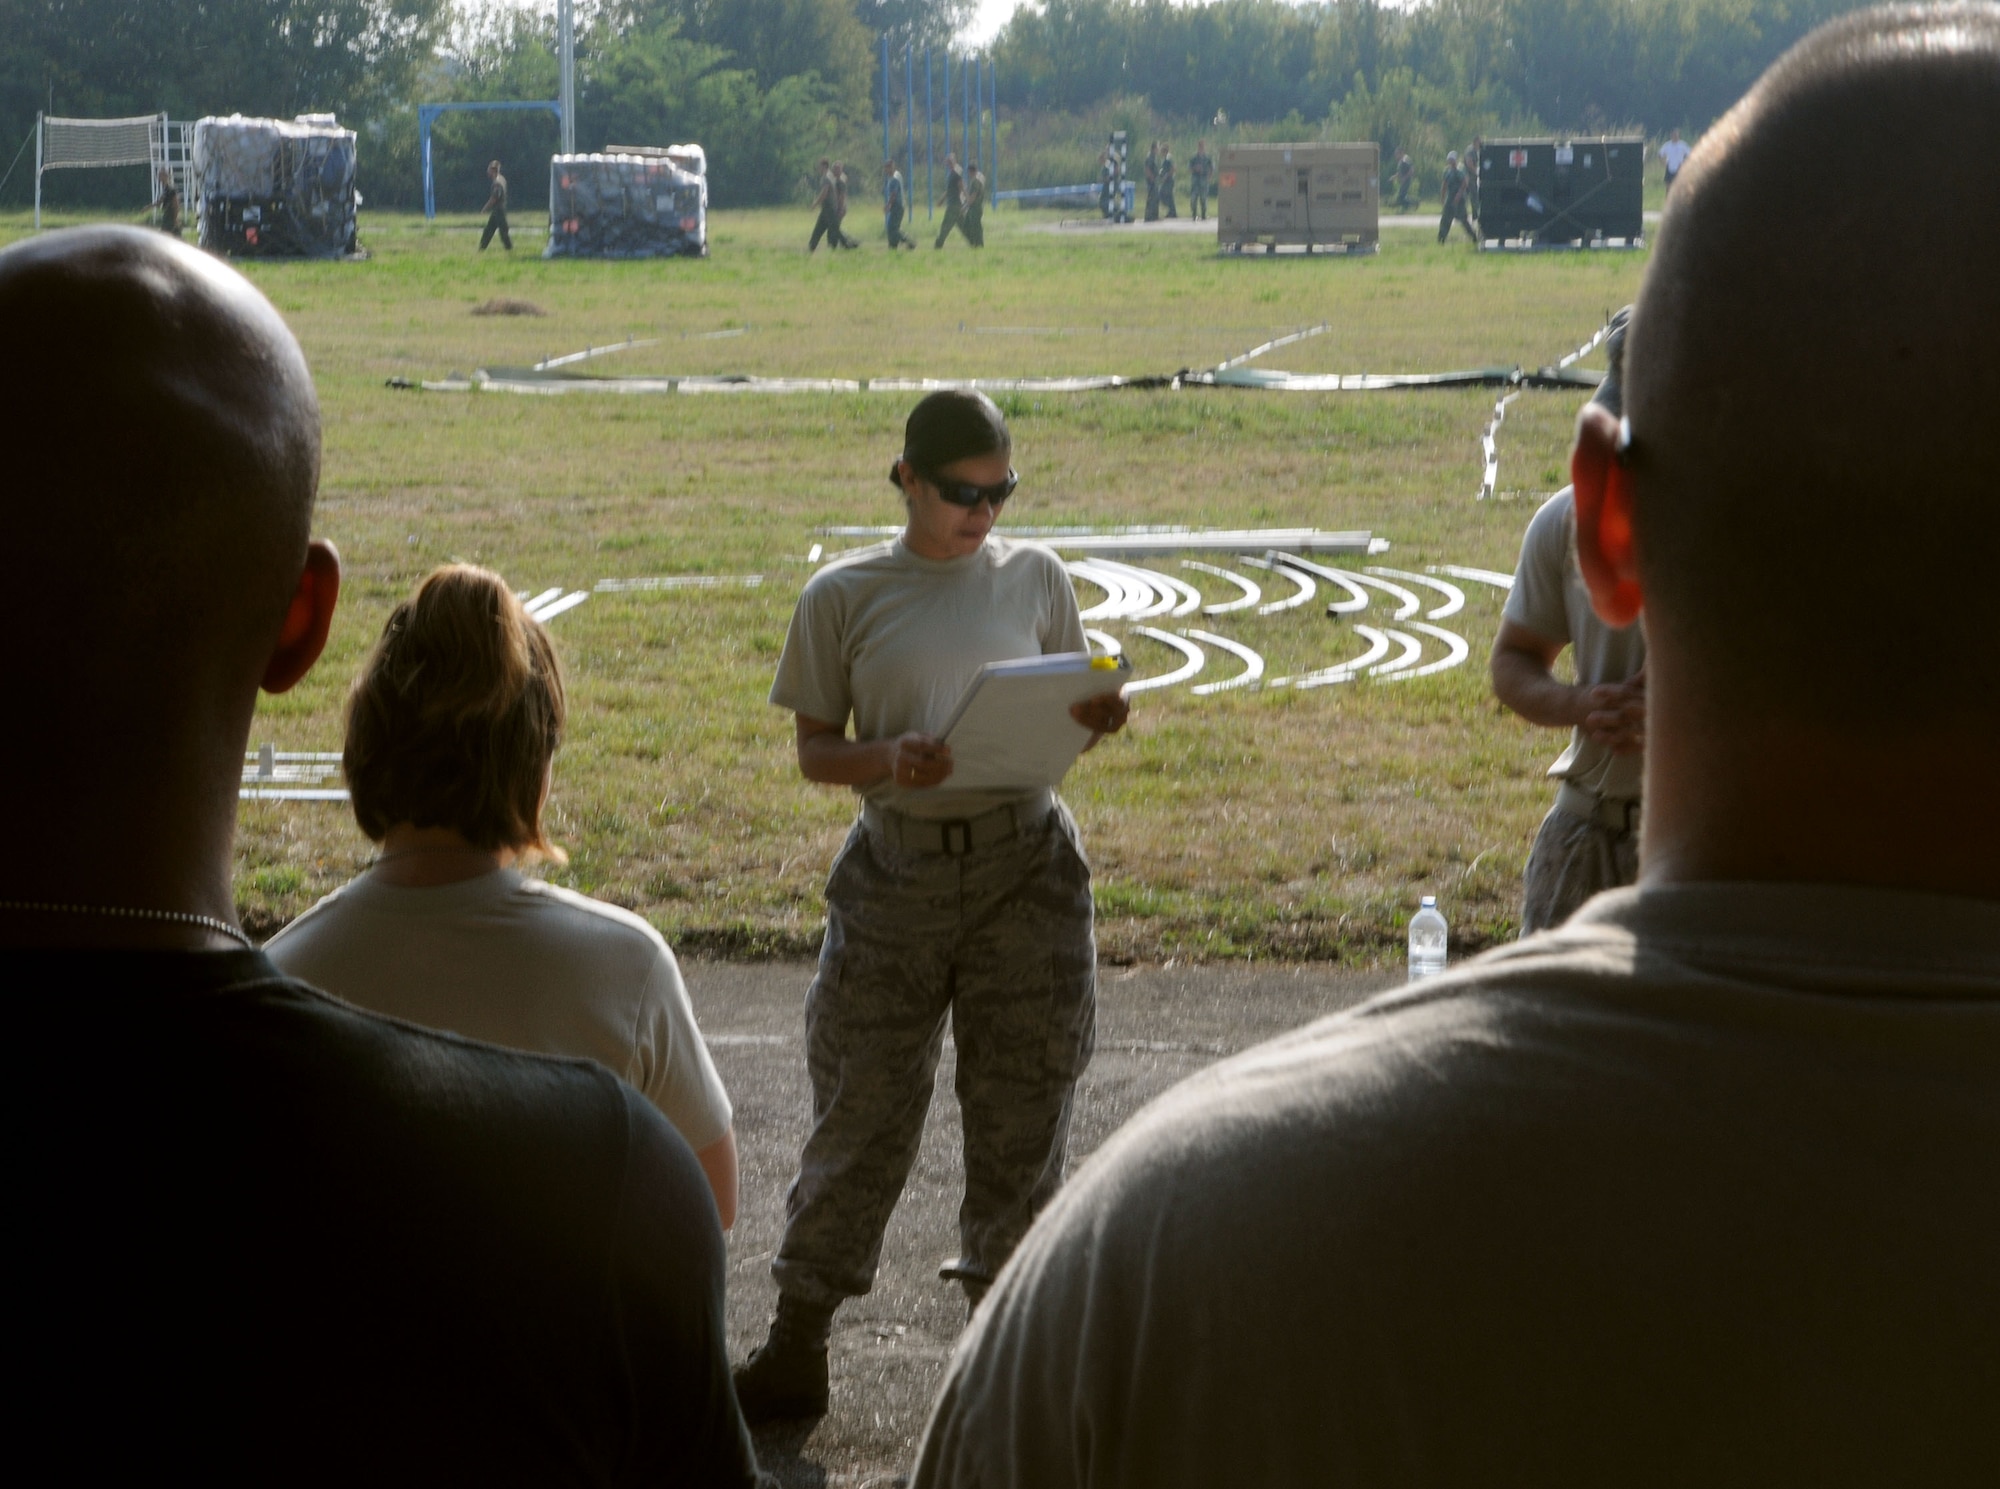 Staff Sgt. Melanie Hernandez, 458th Expeditionary Medical Squadron, briefs Airmen on the plan to set up tents for a mobile hospital Tuesday, Sept. 1, 2009, in Nis, Serbia. The 458th EMEDS stood up in support of the 2009 Military Medical Training Exercise in Central and Eastern Europe Sept. 2 – 13. The exercise, hosted by Serbia, provides a joint medical learning environment and assists host nation civilian and military services; international, private and volunteer organizations; and other participating nations in enhancing disaster response actions. Fifteen nations participated in the exercise. (U.S. Air Force Photo/Senior Airman Alex Martinez)